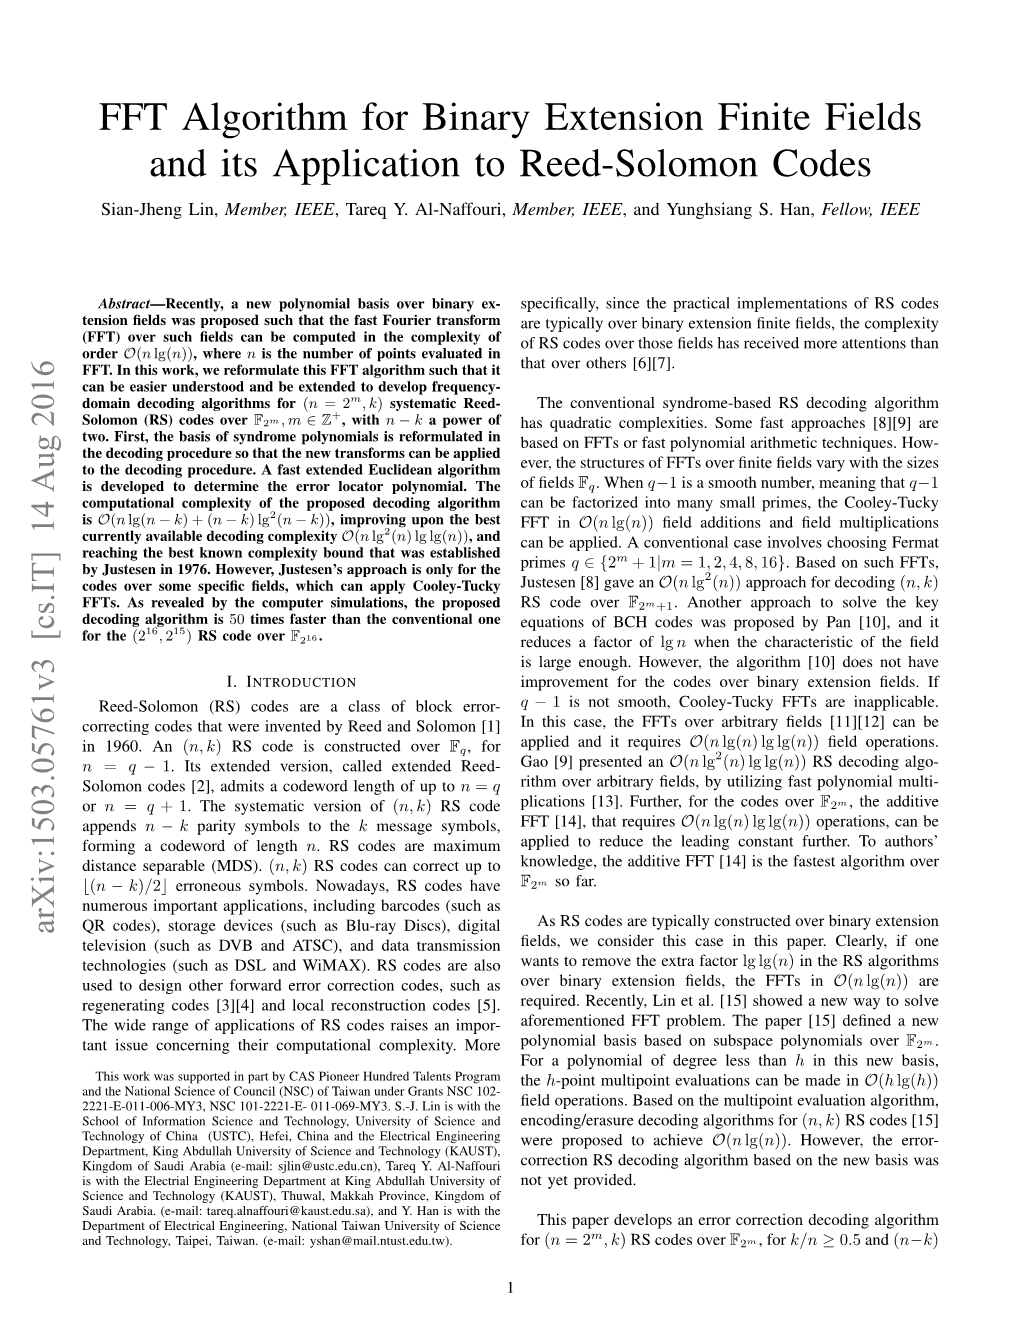 FFT Algorithm for Binary Extension Finite Fields and Its Application to Reed-Solomon Codes Sian-Jheng Lin, Member, IEEE, Tareq Y